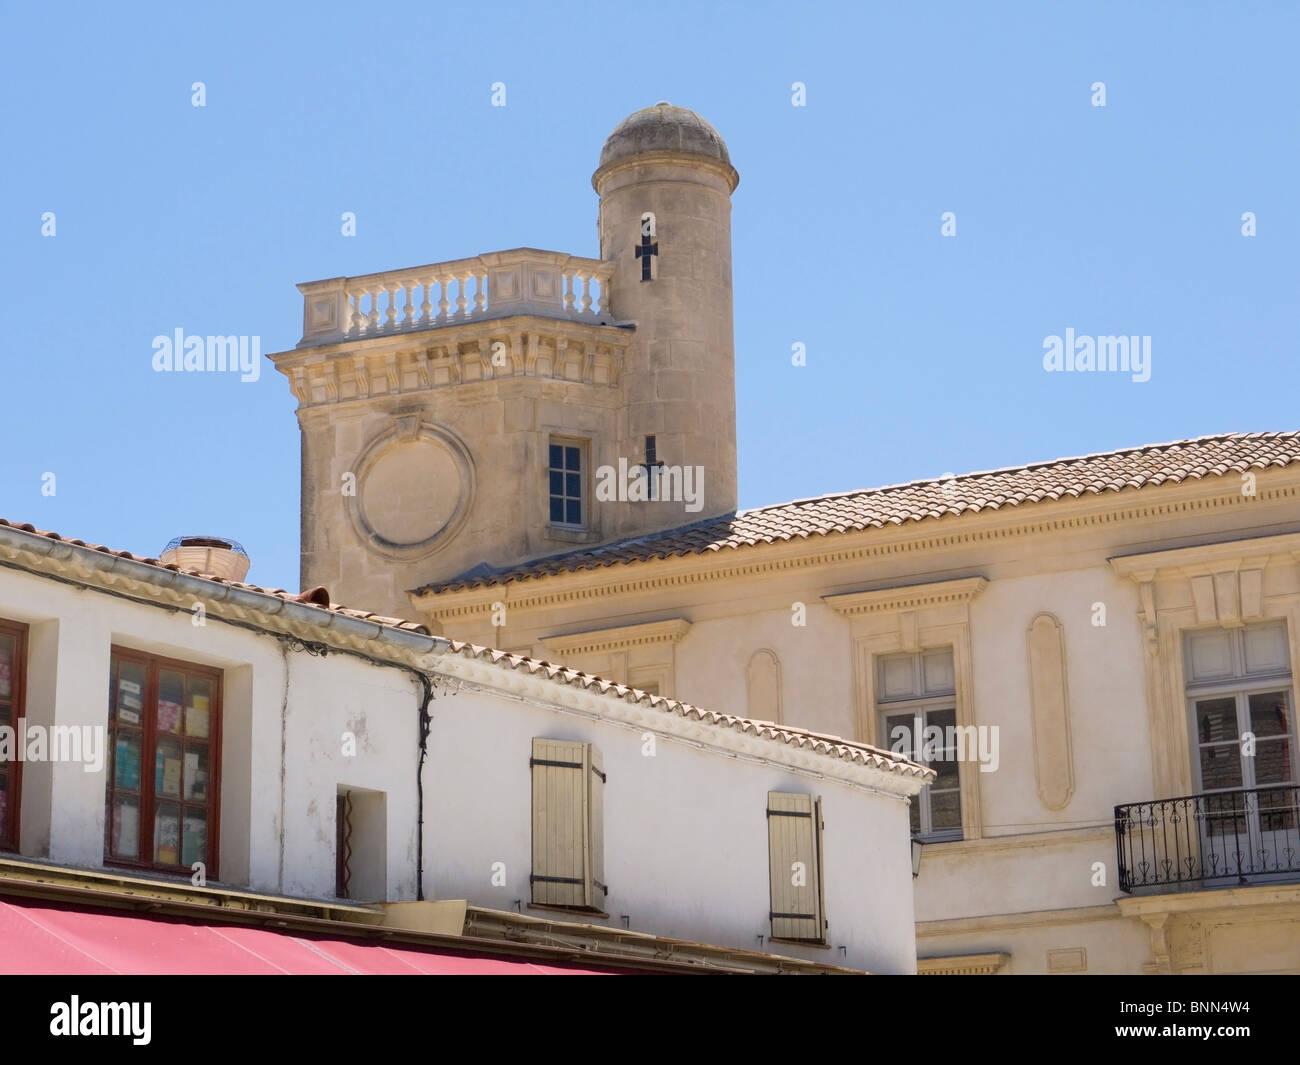 The church and rooftops in Saintes Maries de la Mer, Camargue, South of France. Stock Photo